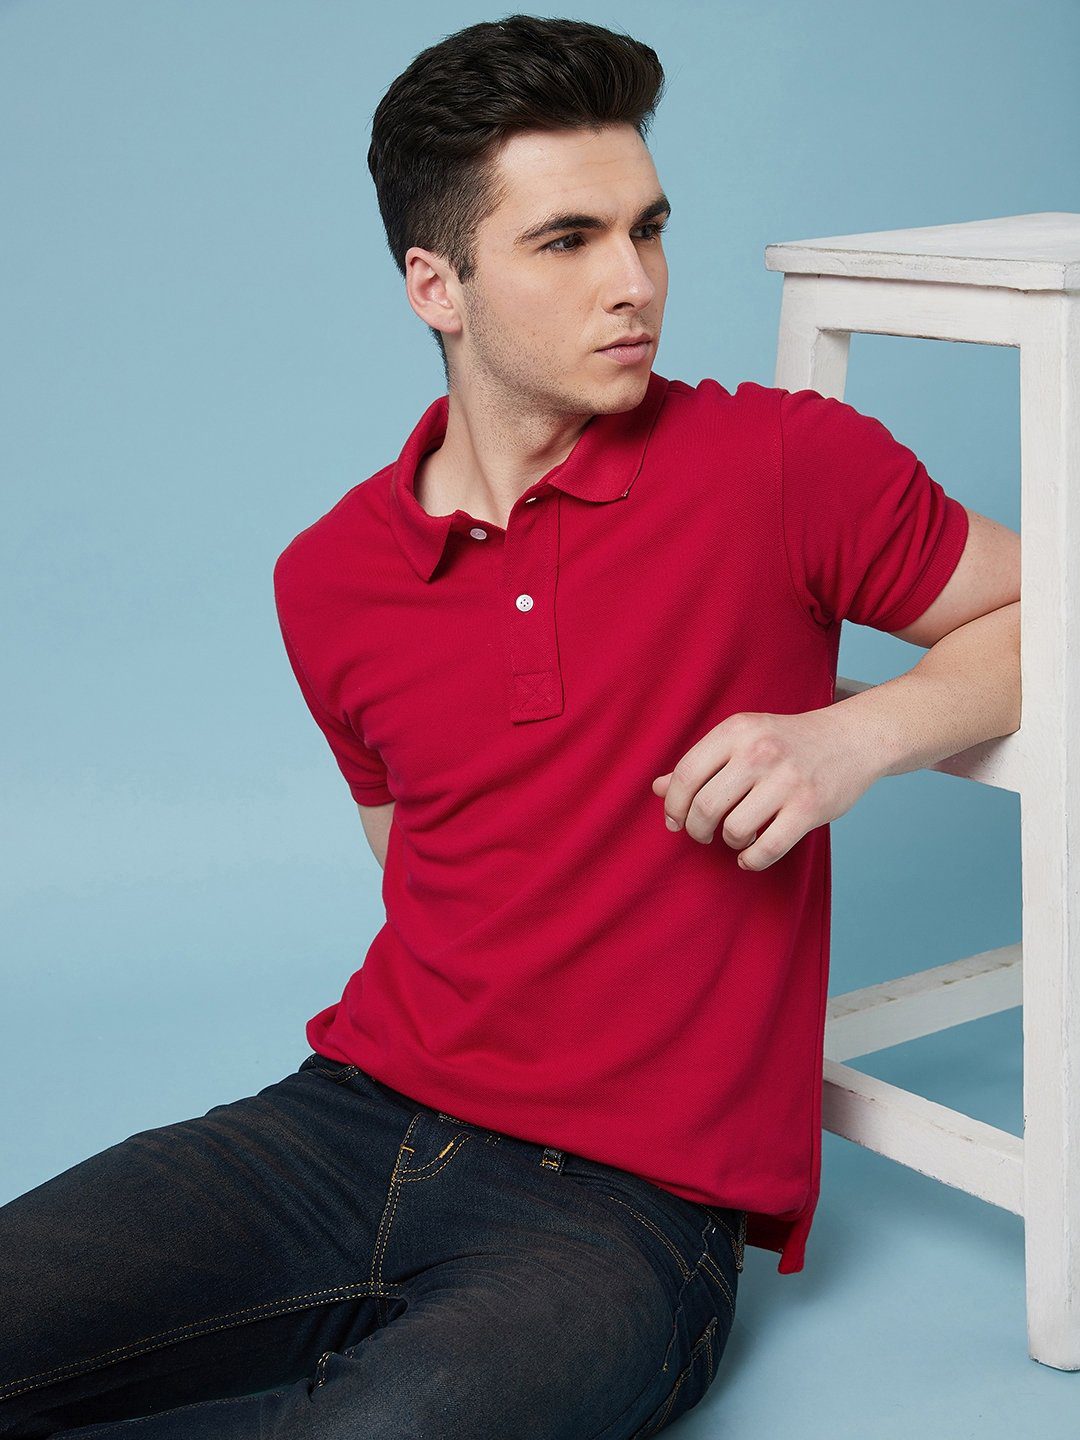 How to Style a Red T-Shirt – Outfit Ideas for Women and Men